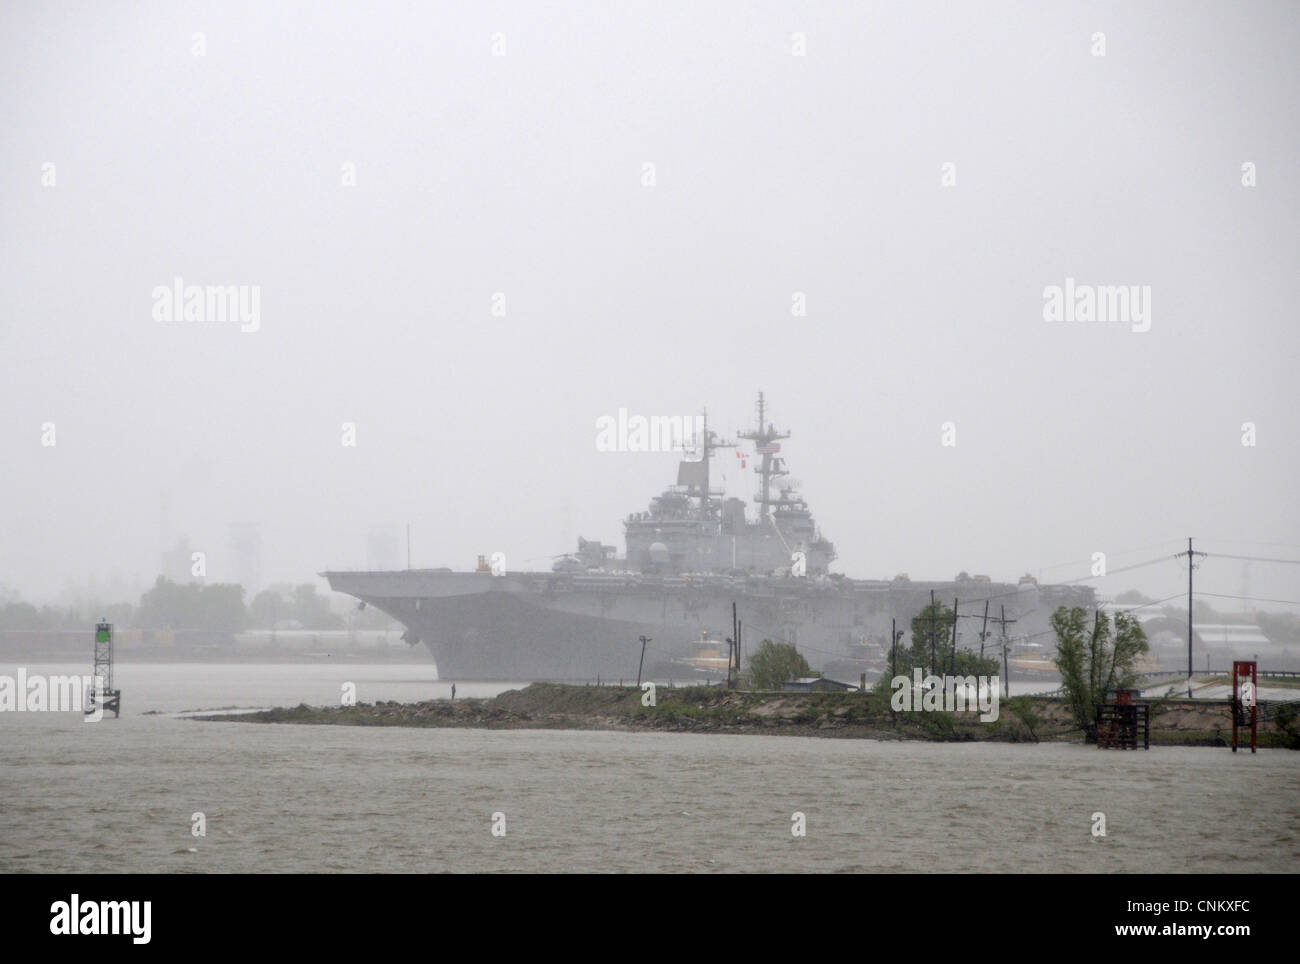 With Algiers Point in the foreground, the multipurpose amphibious assault ship USS Wasp (LHD 1) arrives for The War of 1812 Bicentennial Commemoration in New Orleans. The event is part of a series of city visits by the Navy, Coast Guard, Marine Corps and Operation Sail beginning in April 2012 and concluding in 2015. New Orleans is the first and the last city visit in the series. Stock Photo